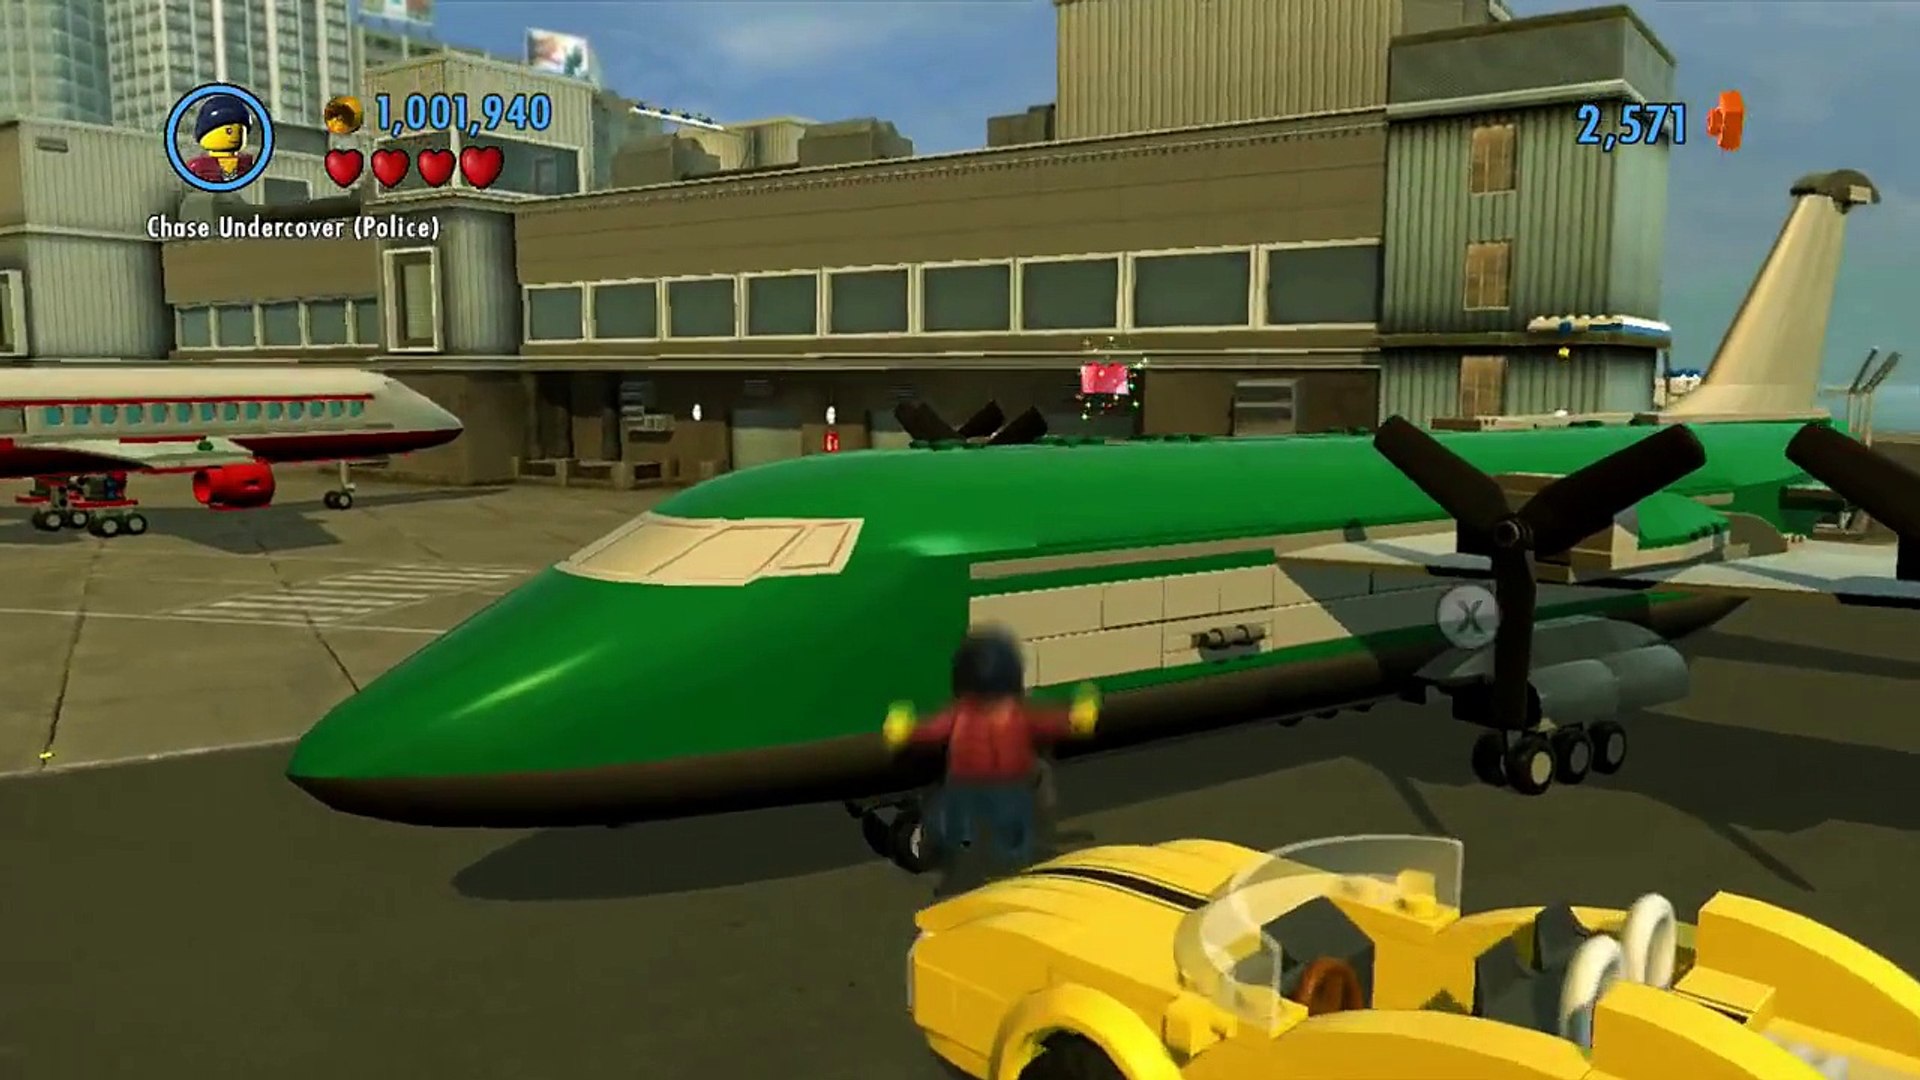 LEGO City Undercover - Chap 10: Airport, Collect Super Bricks, Airplanes  1080 HD Gameplay Wii U - video Dailymotion